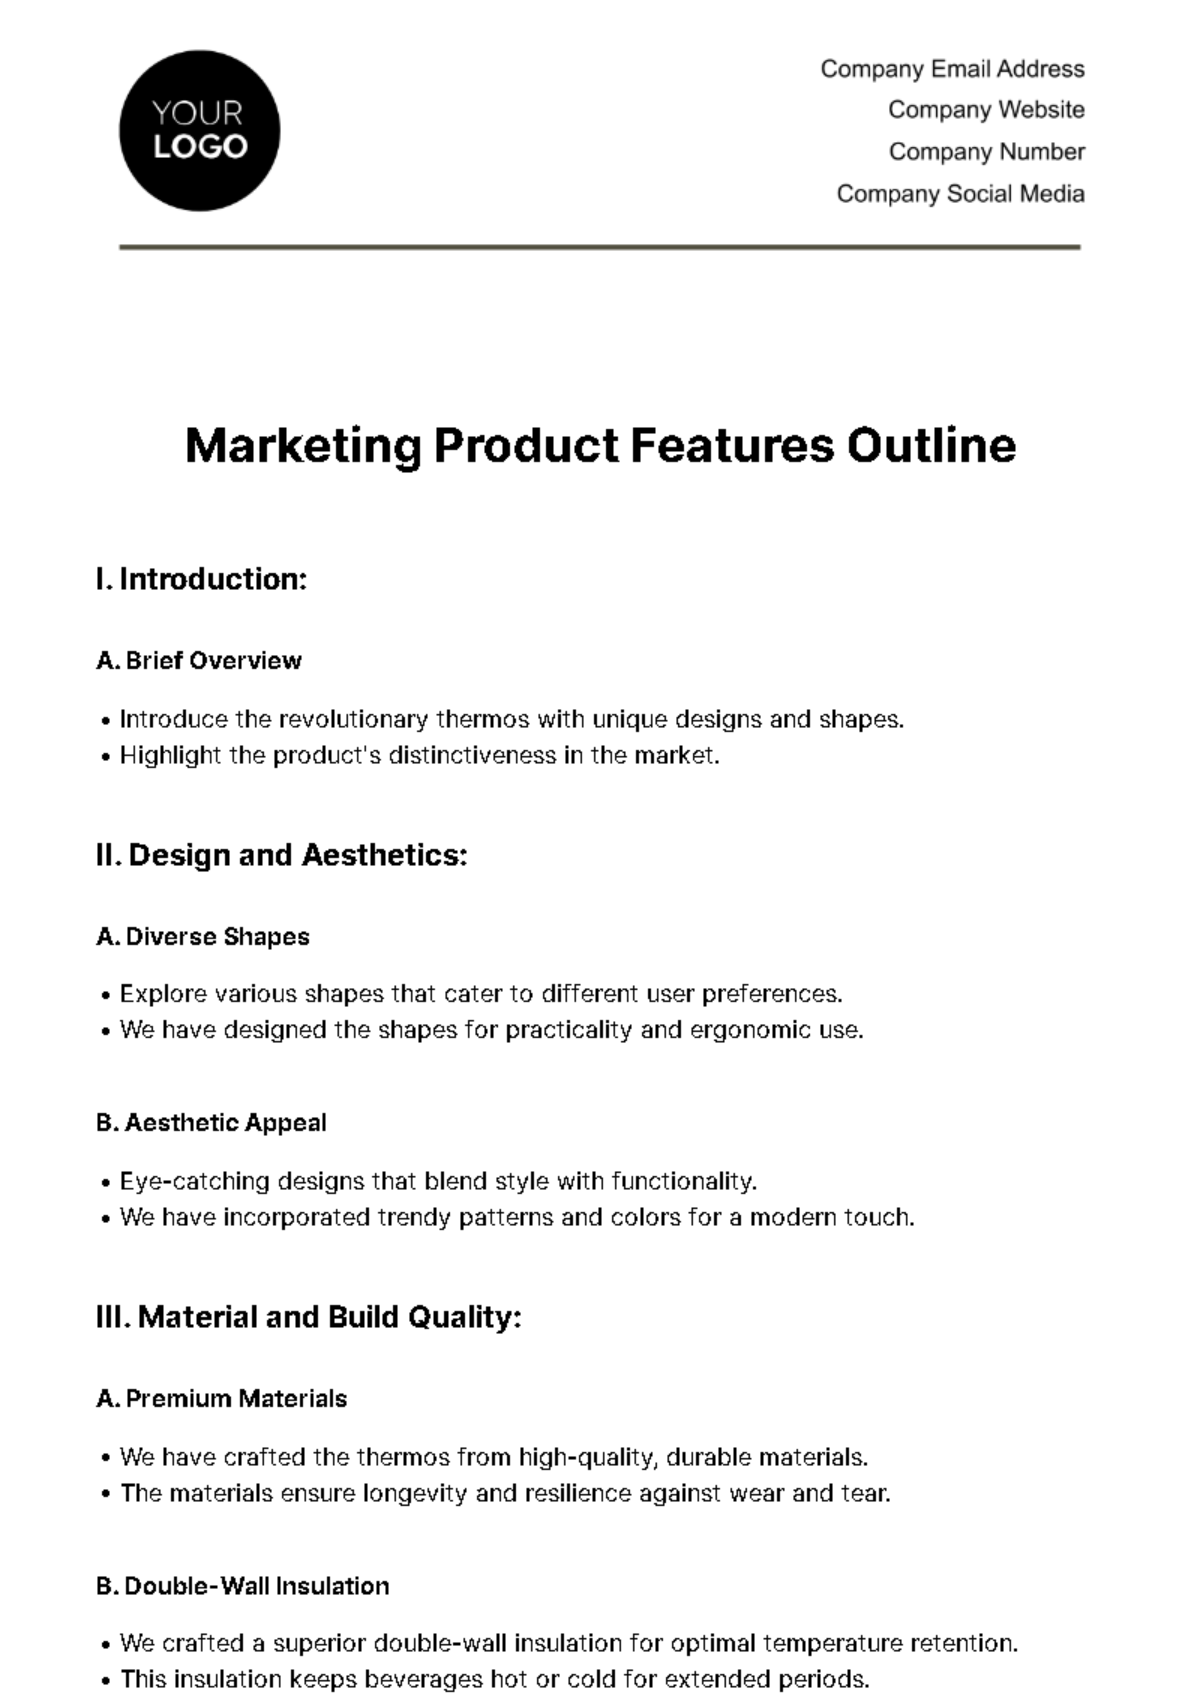 Free Marketing Product Features Outline Template